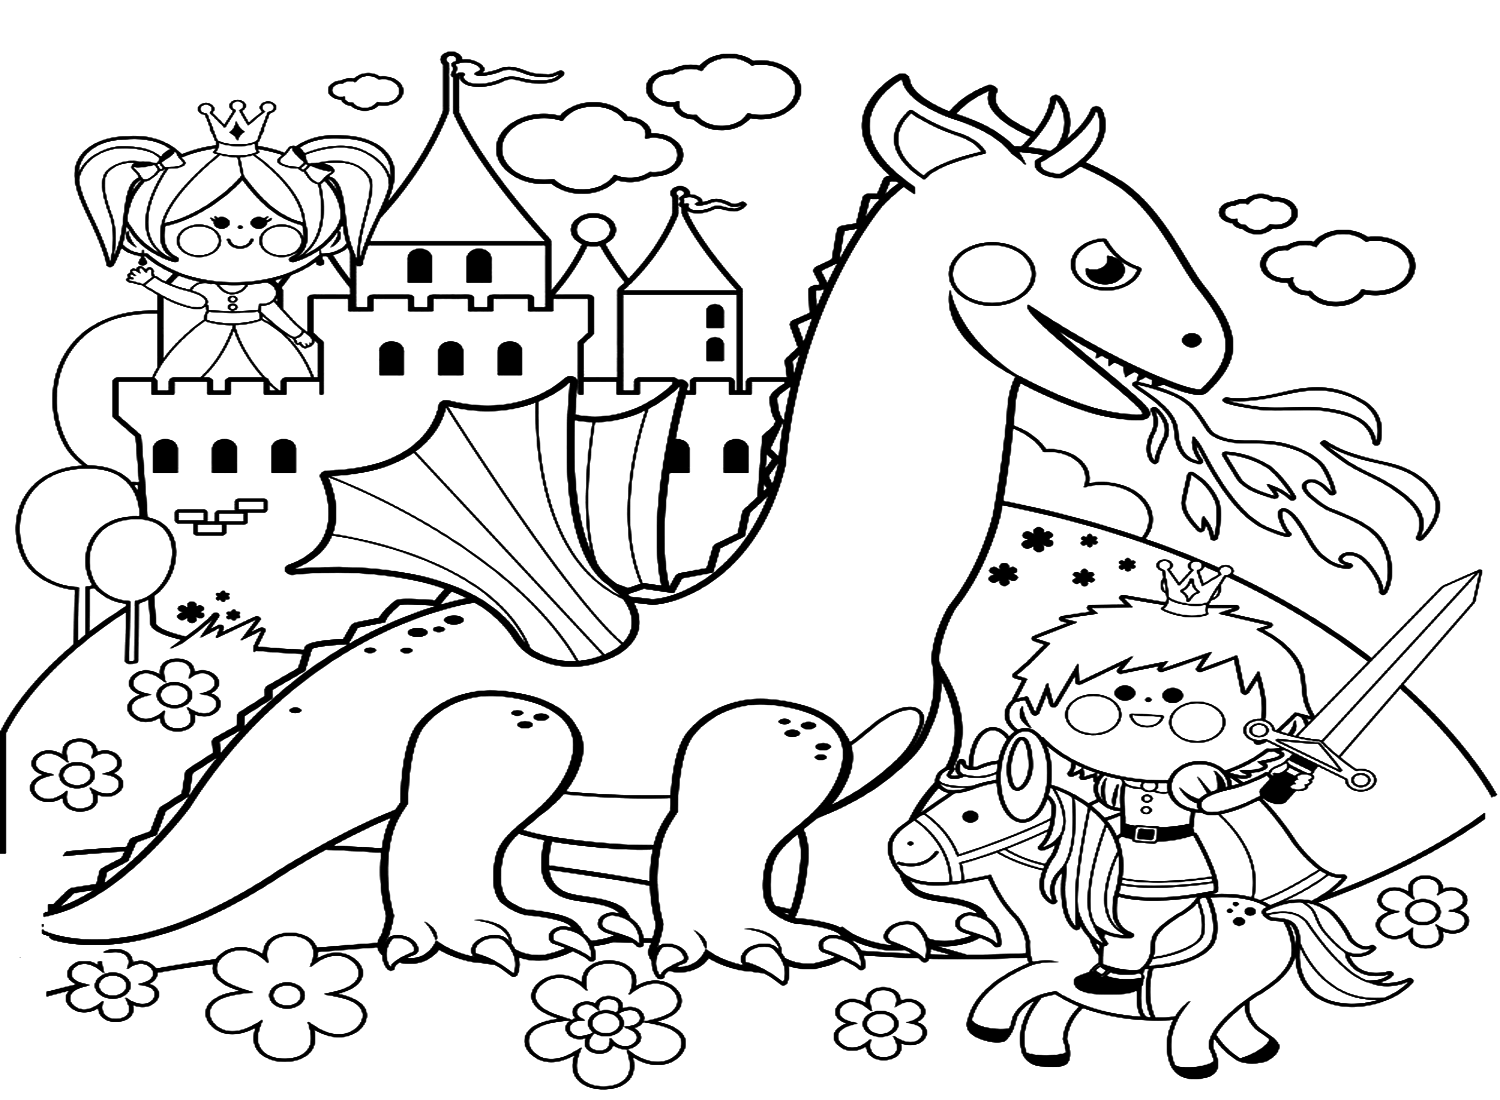 Dragon Coloring Page For Kids